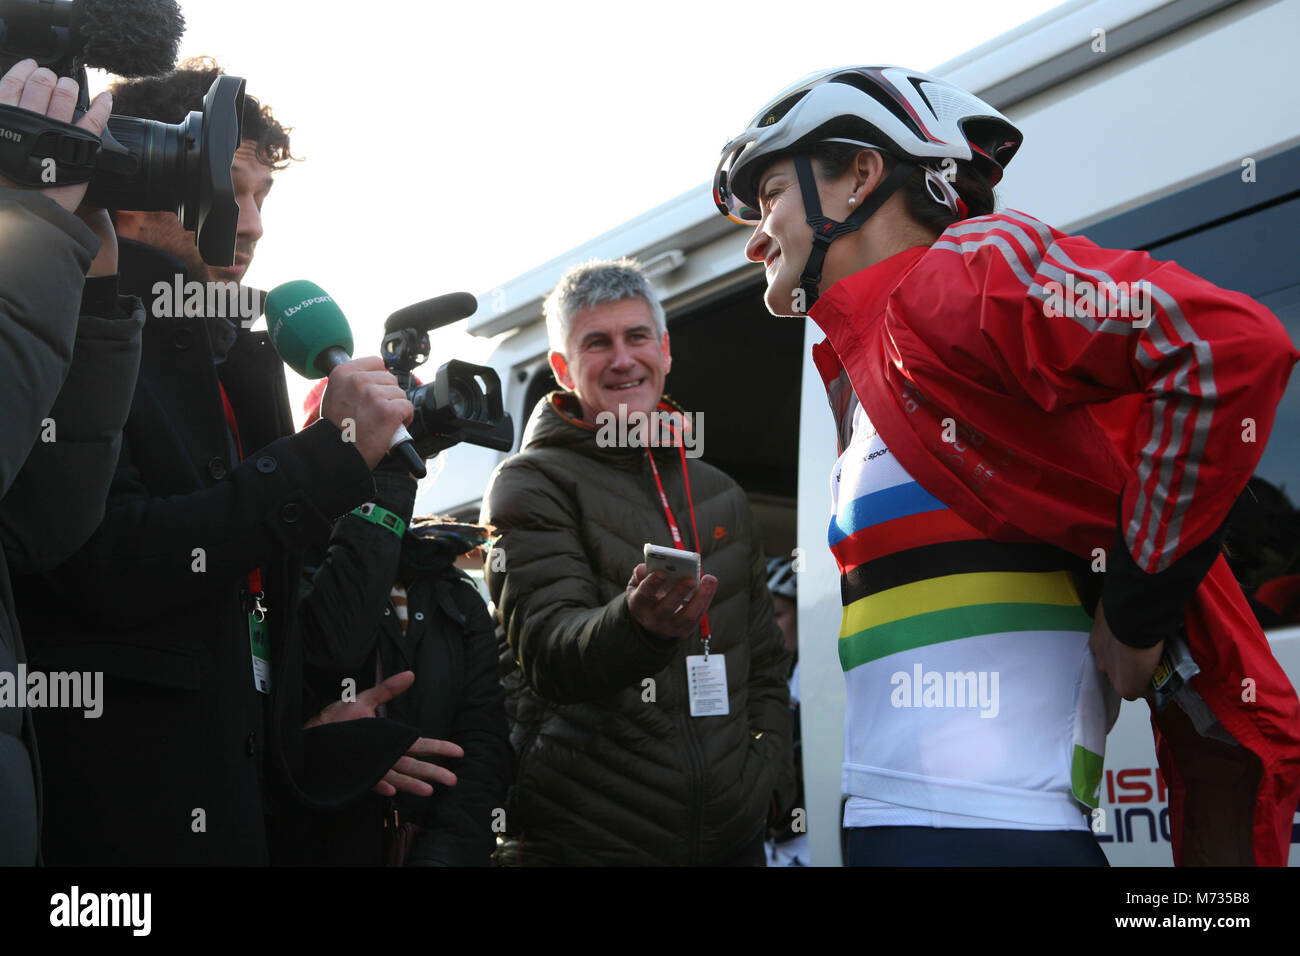 Tour de Yorkshire 2016 World road cycling champion Lizzie Armistead interviewed by the media prior to the Womens race at the 2016 tour de Yorkshire Stock Photo